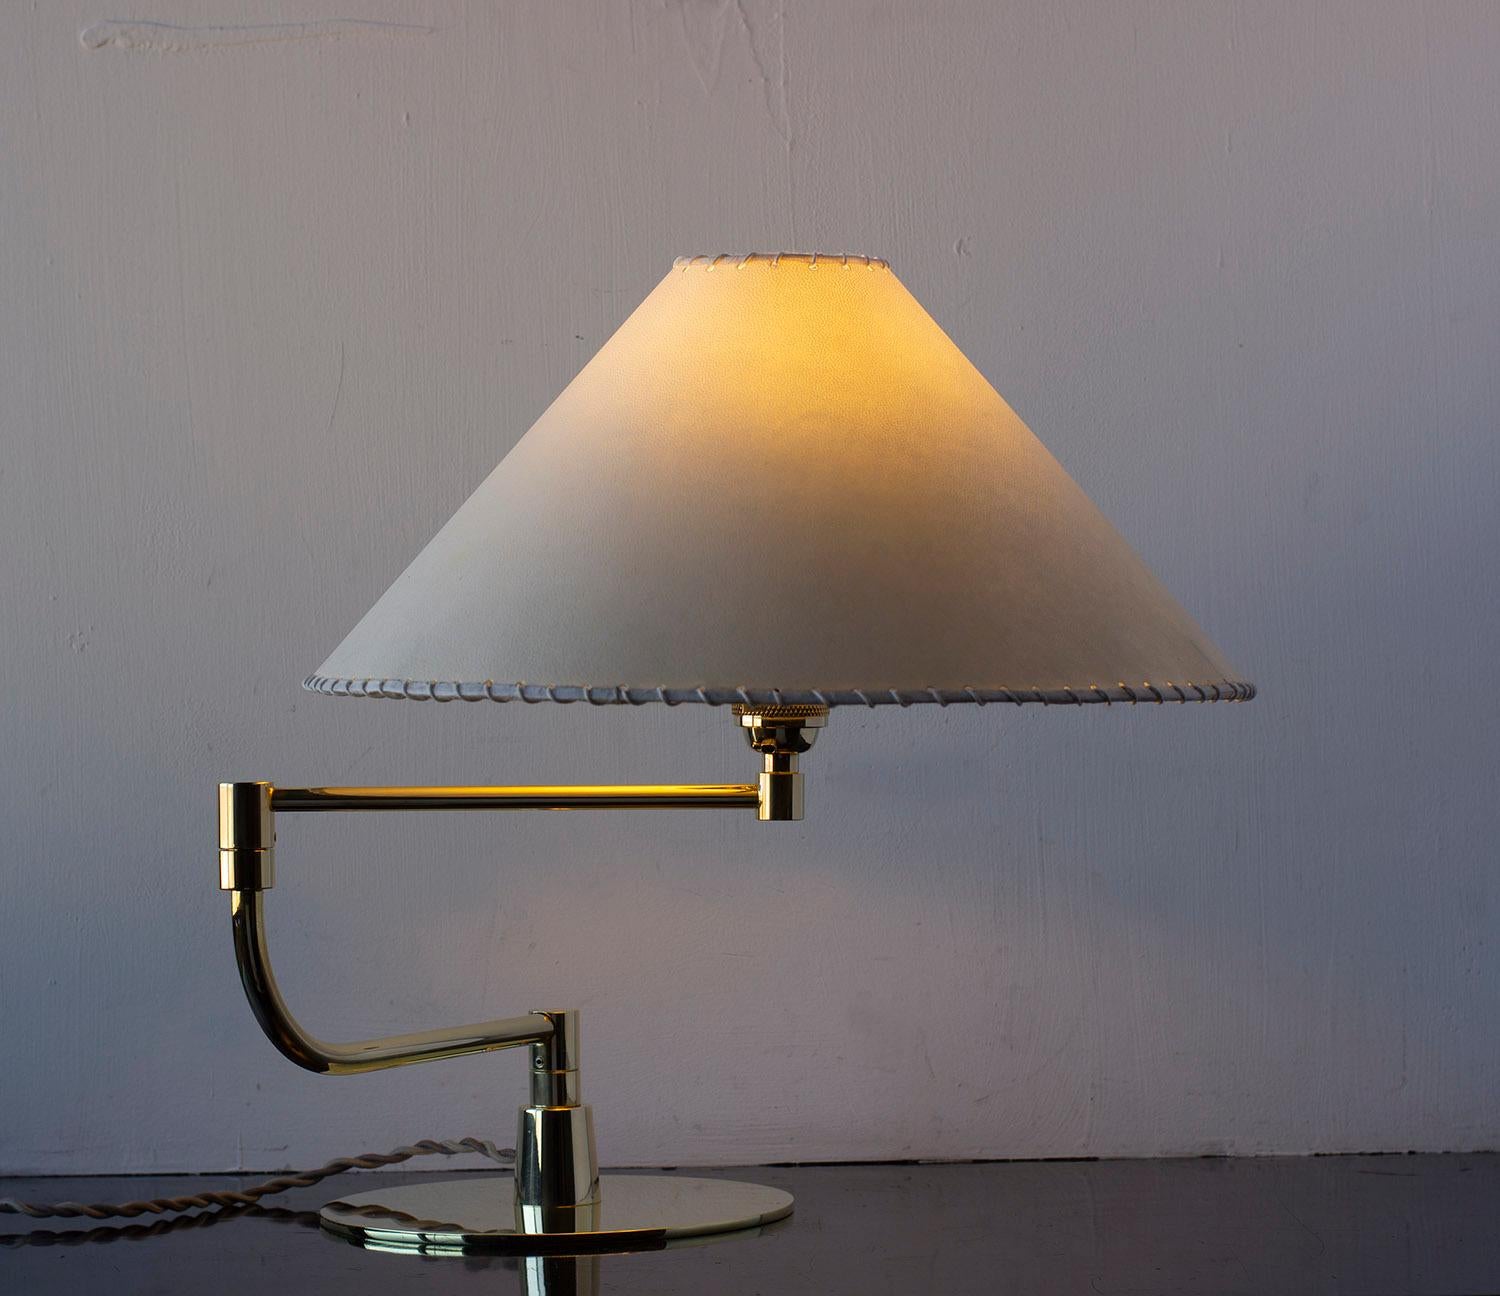 Solid machined brass and goatskin parchment shade with hand-dyed braided cotton cord. Adjustable pivot arm. 

Shades are made from genuine goatskin parchment, hand-selected for each lamp for its natural texture, pattern and color. Reminiscent of the